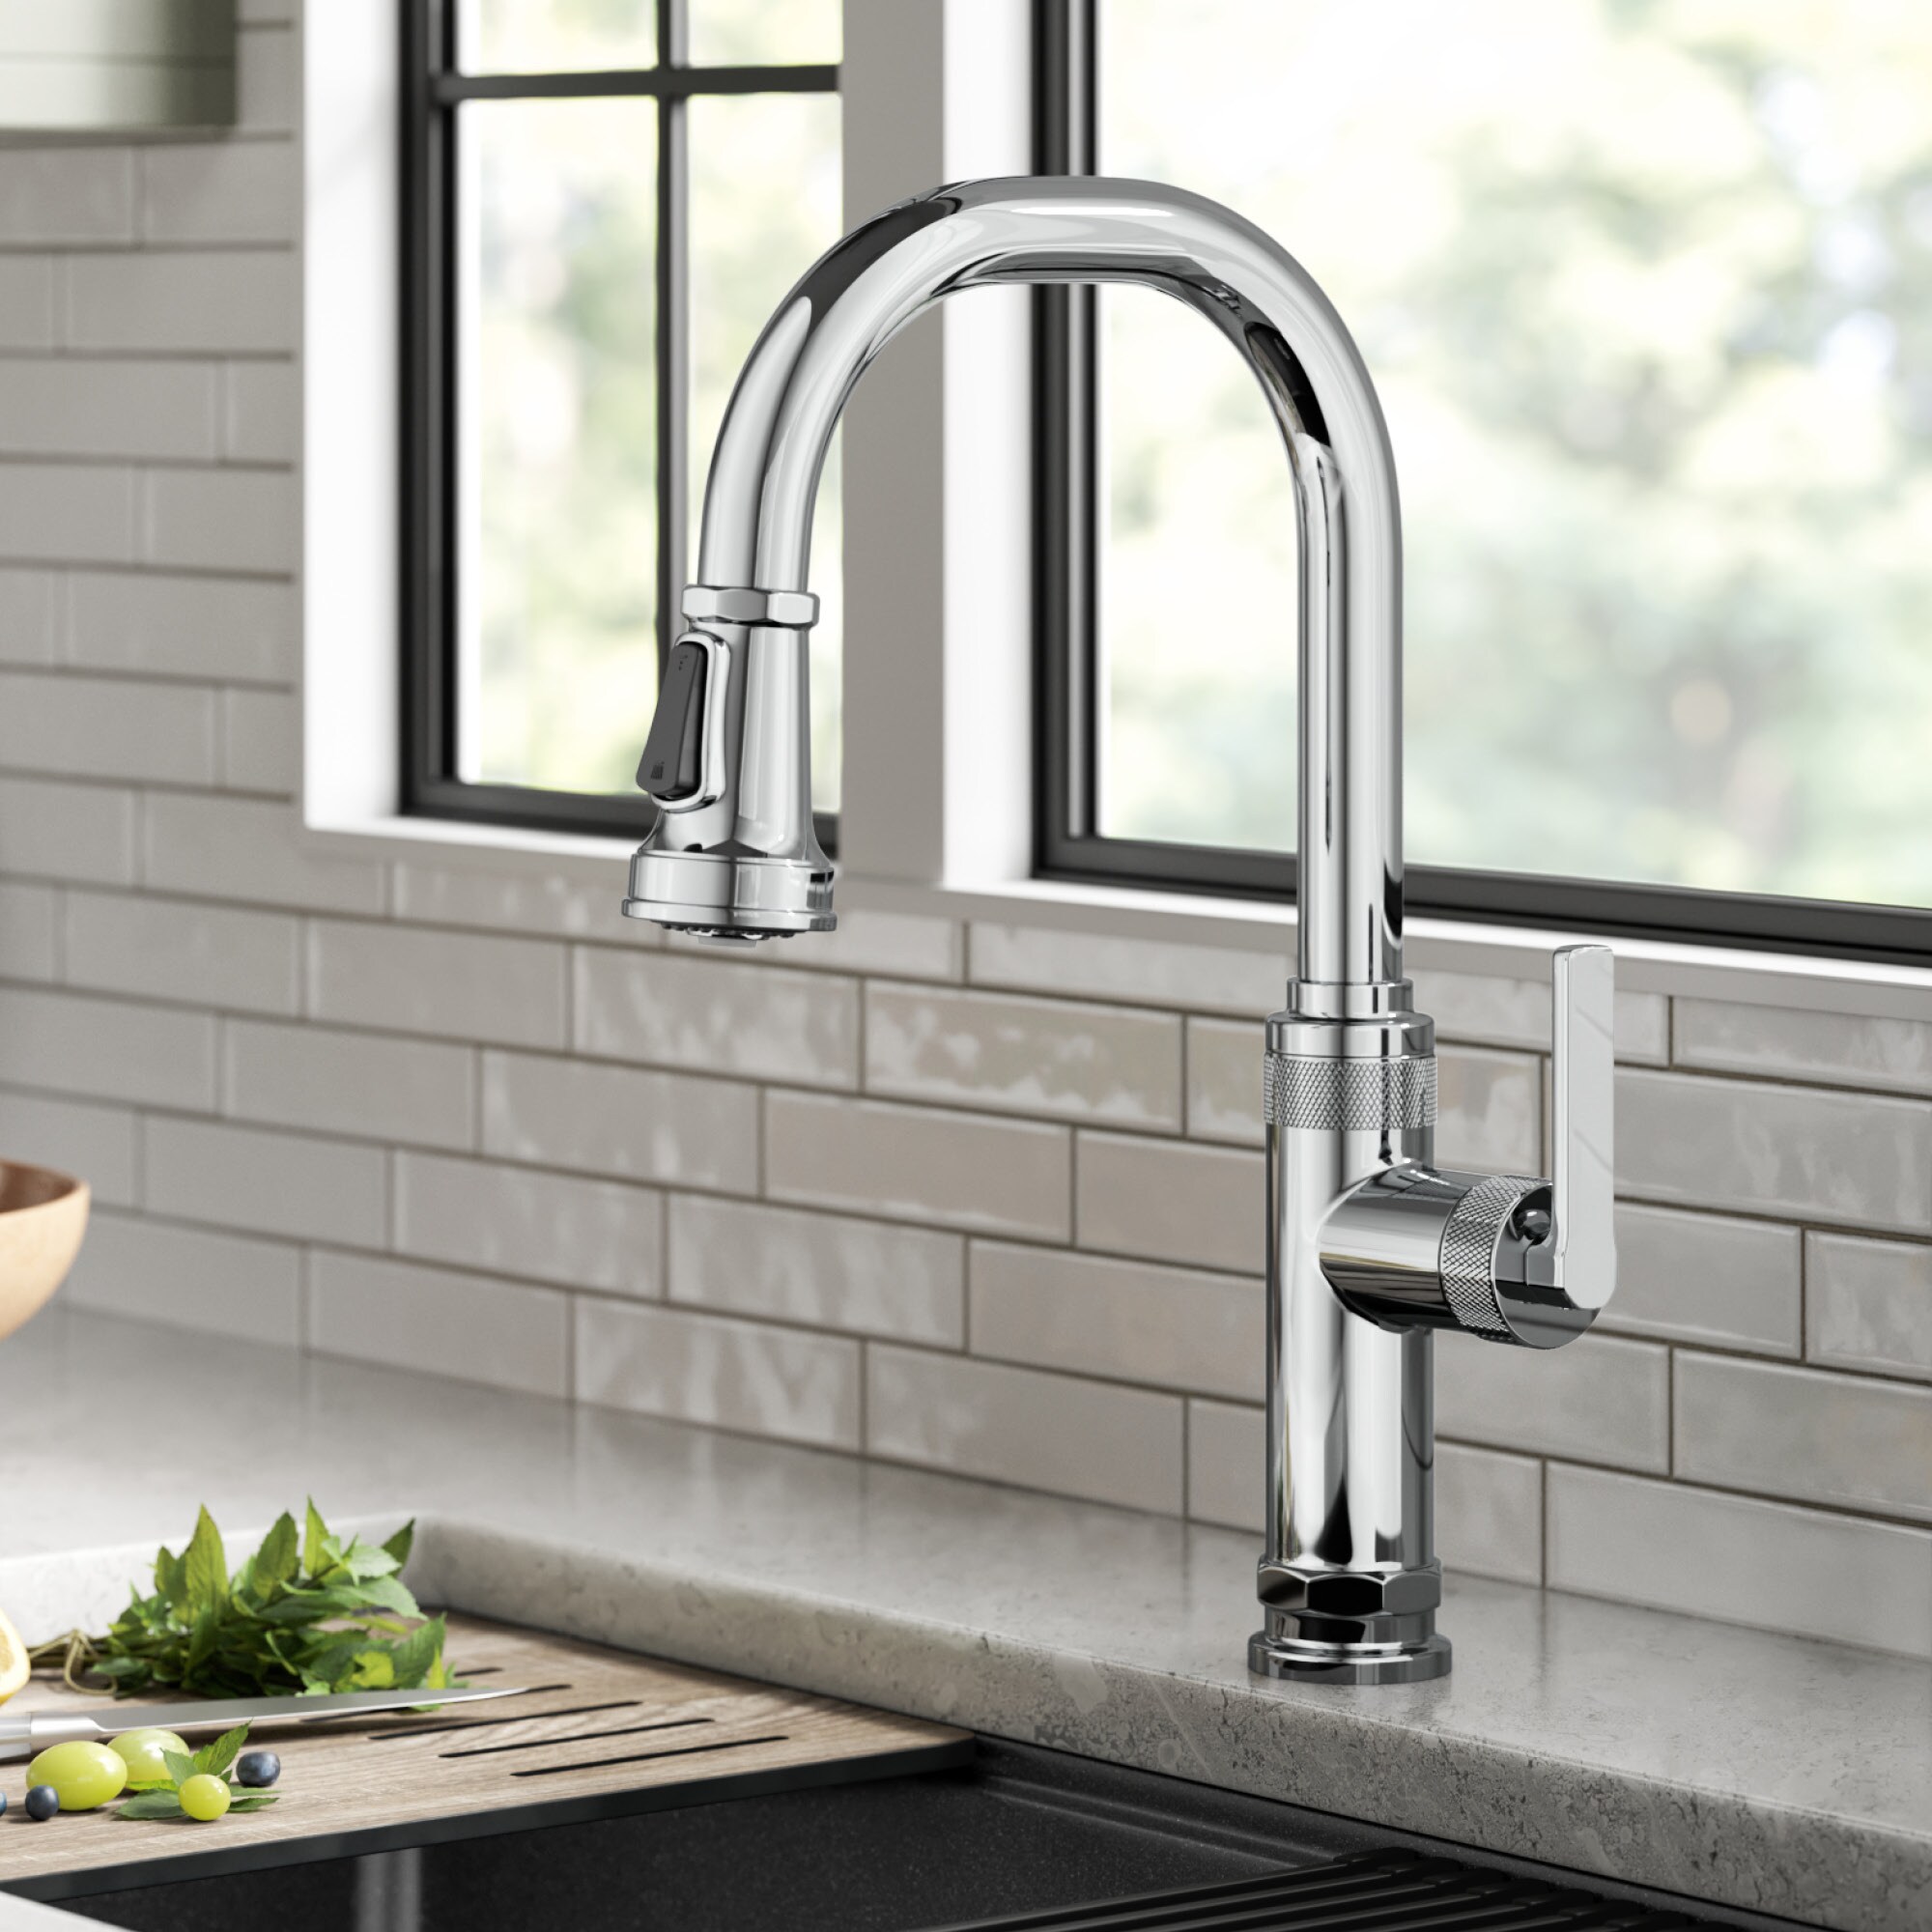 Kraus Allyn Chrome Single Handle High-arc Kitchen Faucet in the Kitchen ...